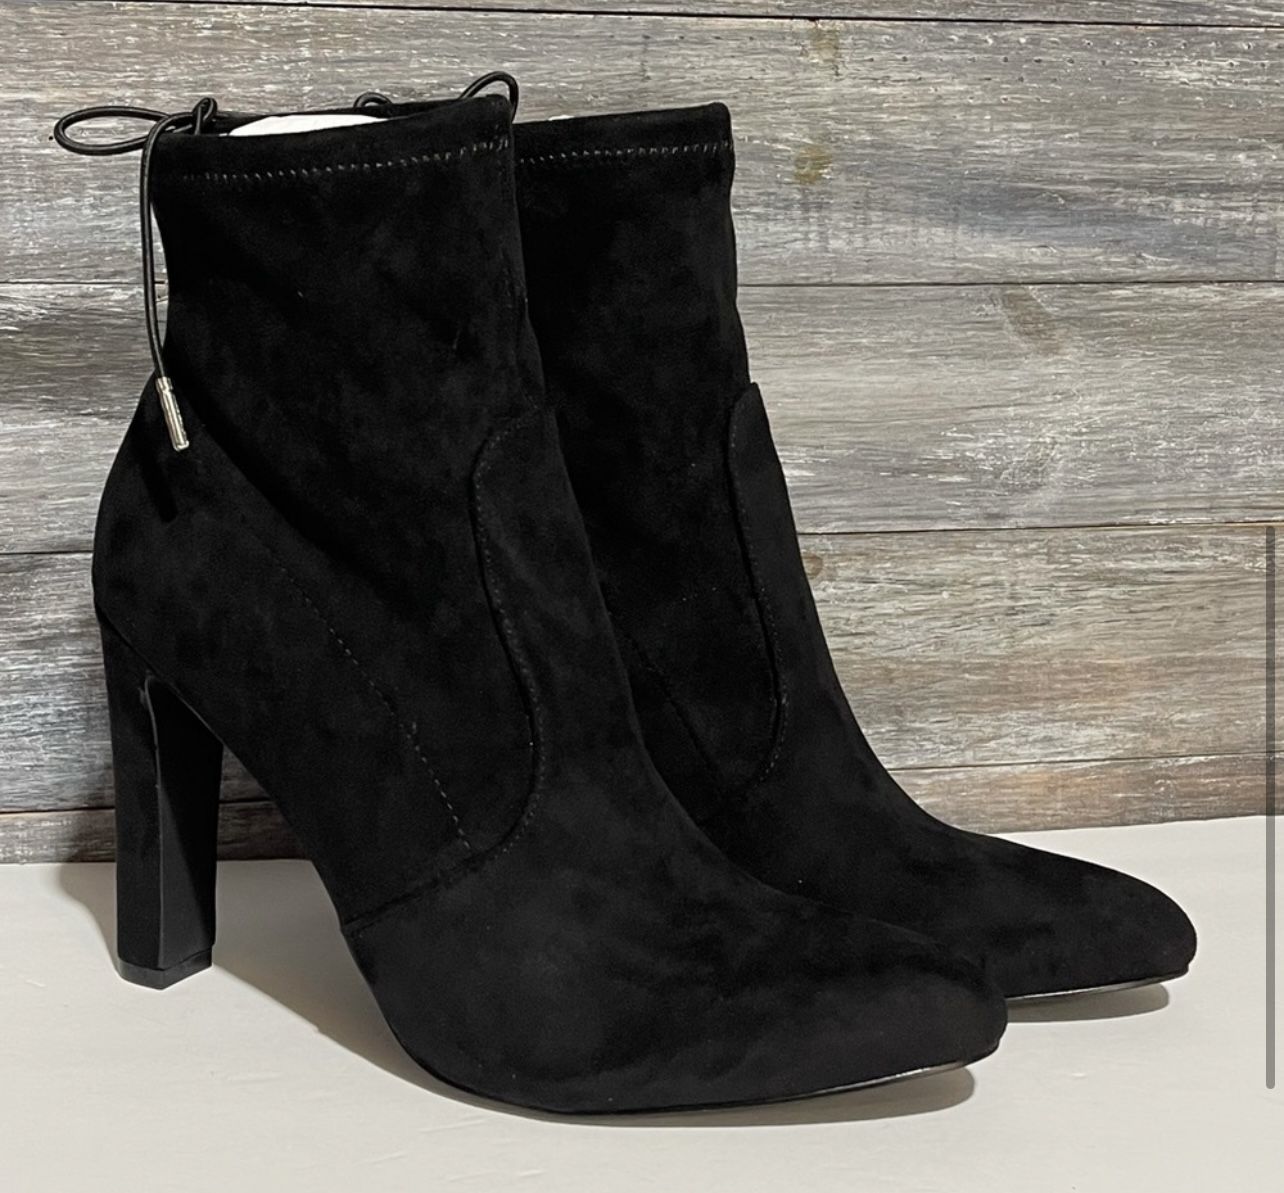 NEW JustFab Black Faux Suede Heel Ankle Boots • Women’s Size 11